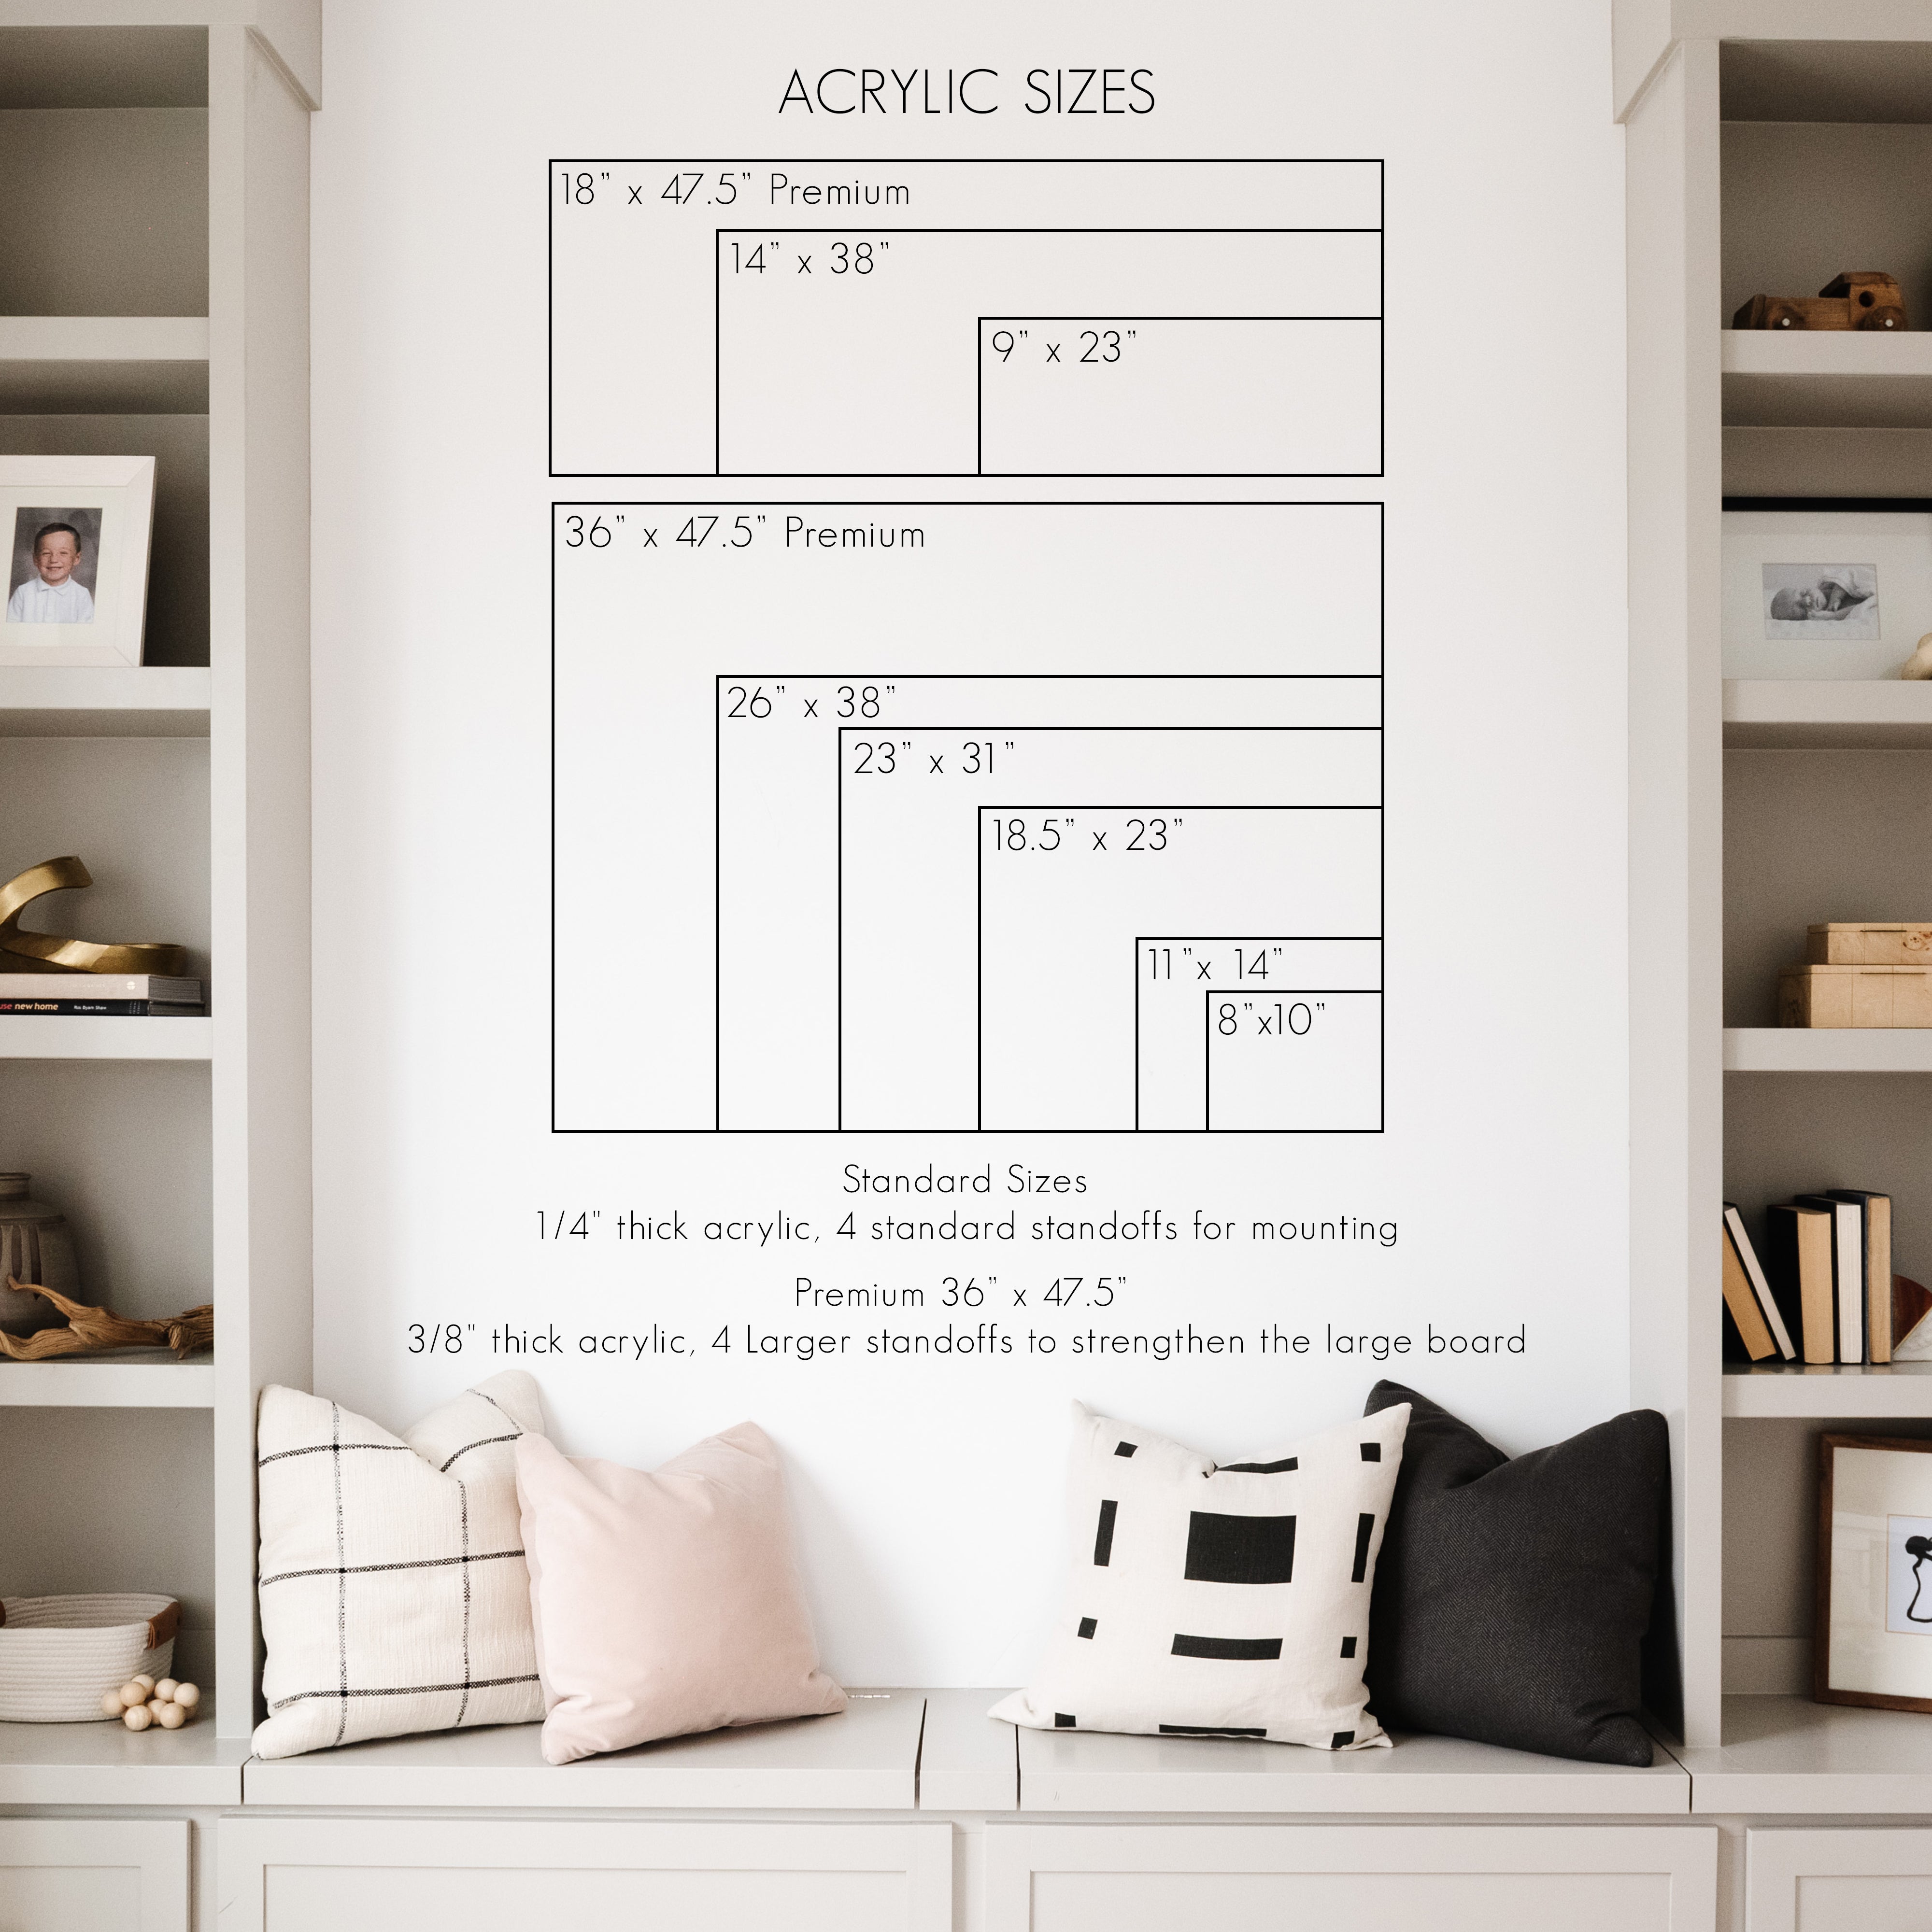 Weekly Frosted Acrylic Calendar + 2 Sections | Horizontal Multi-Style